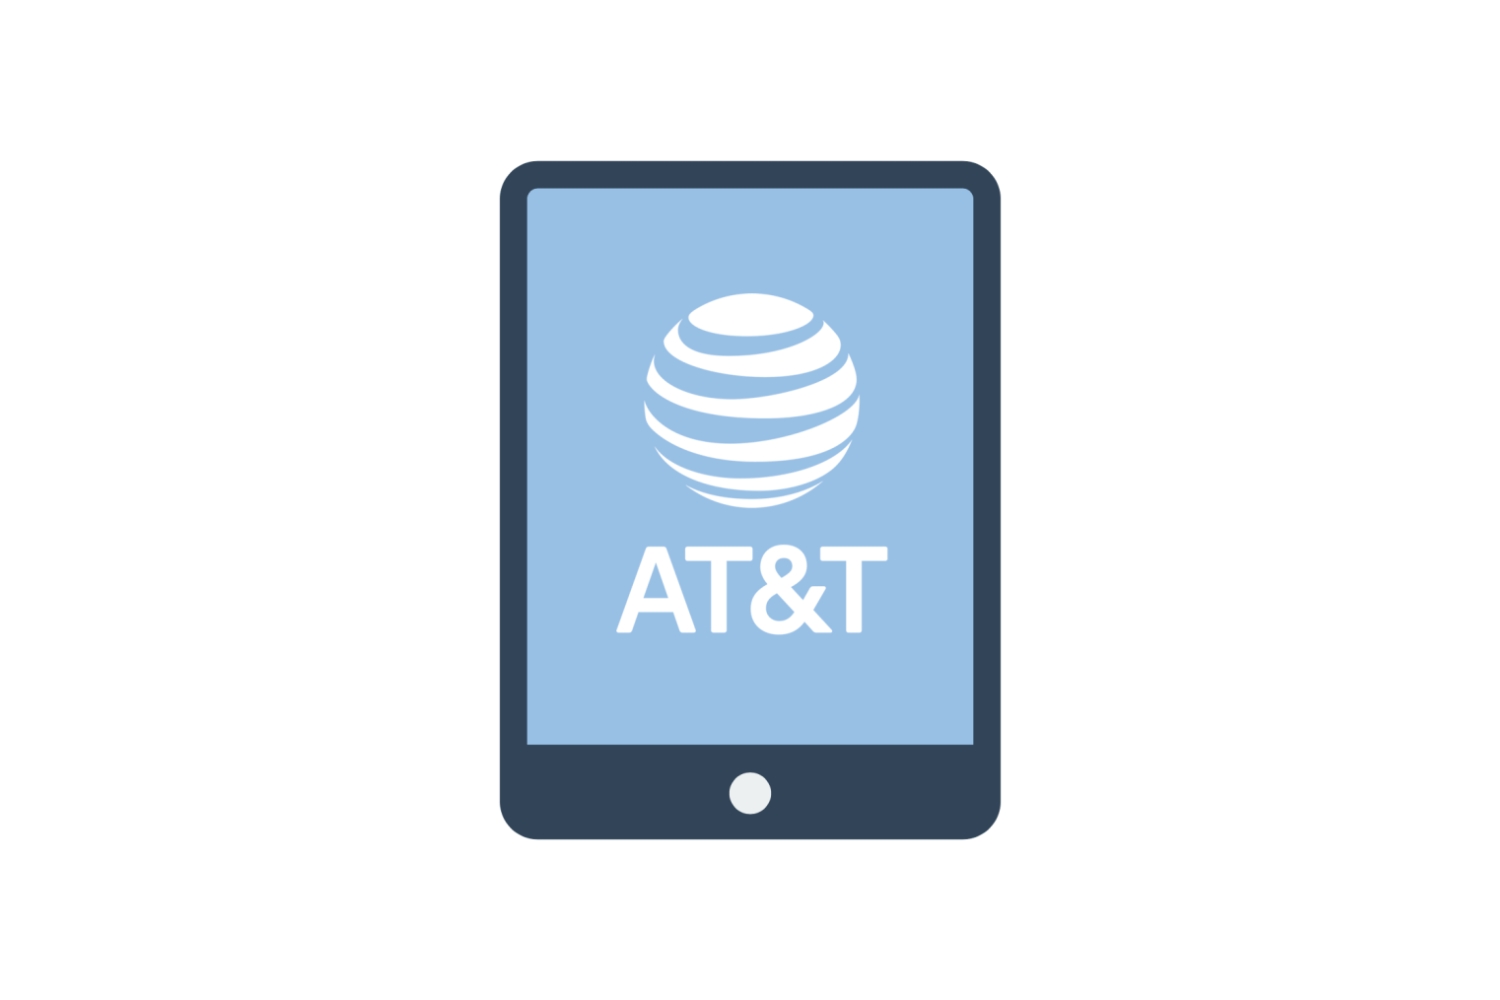 How To Add A Tablet To AT&T Plan